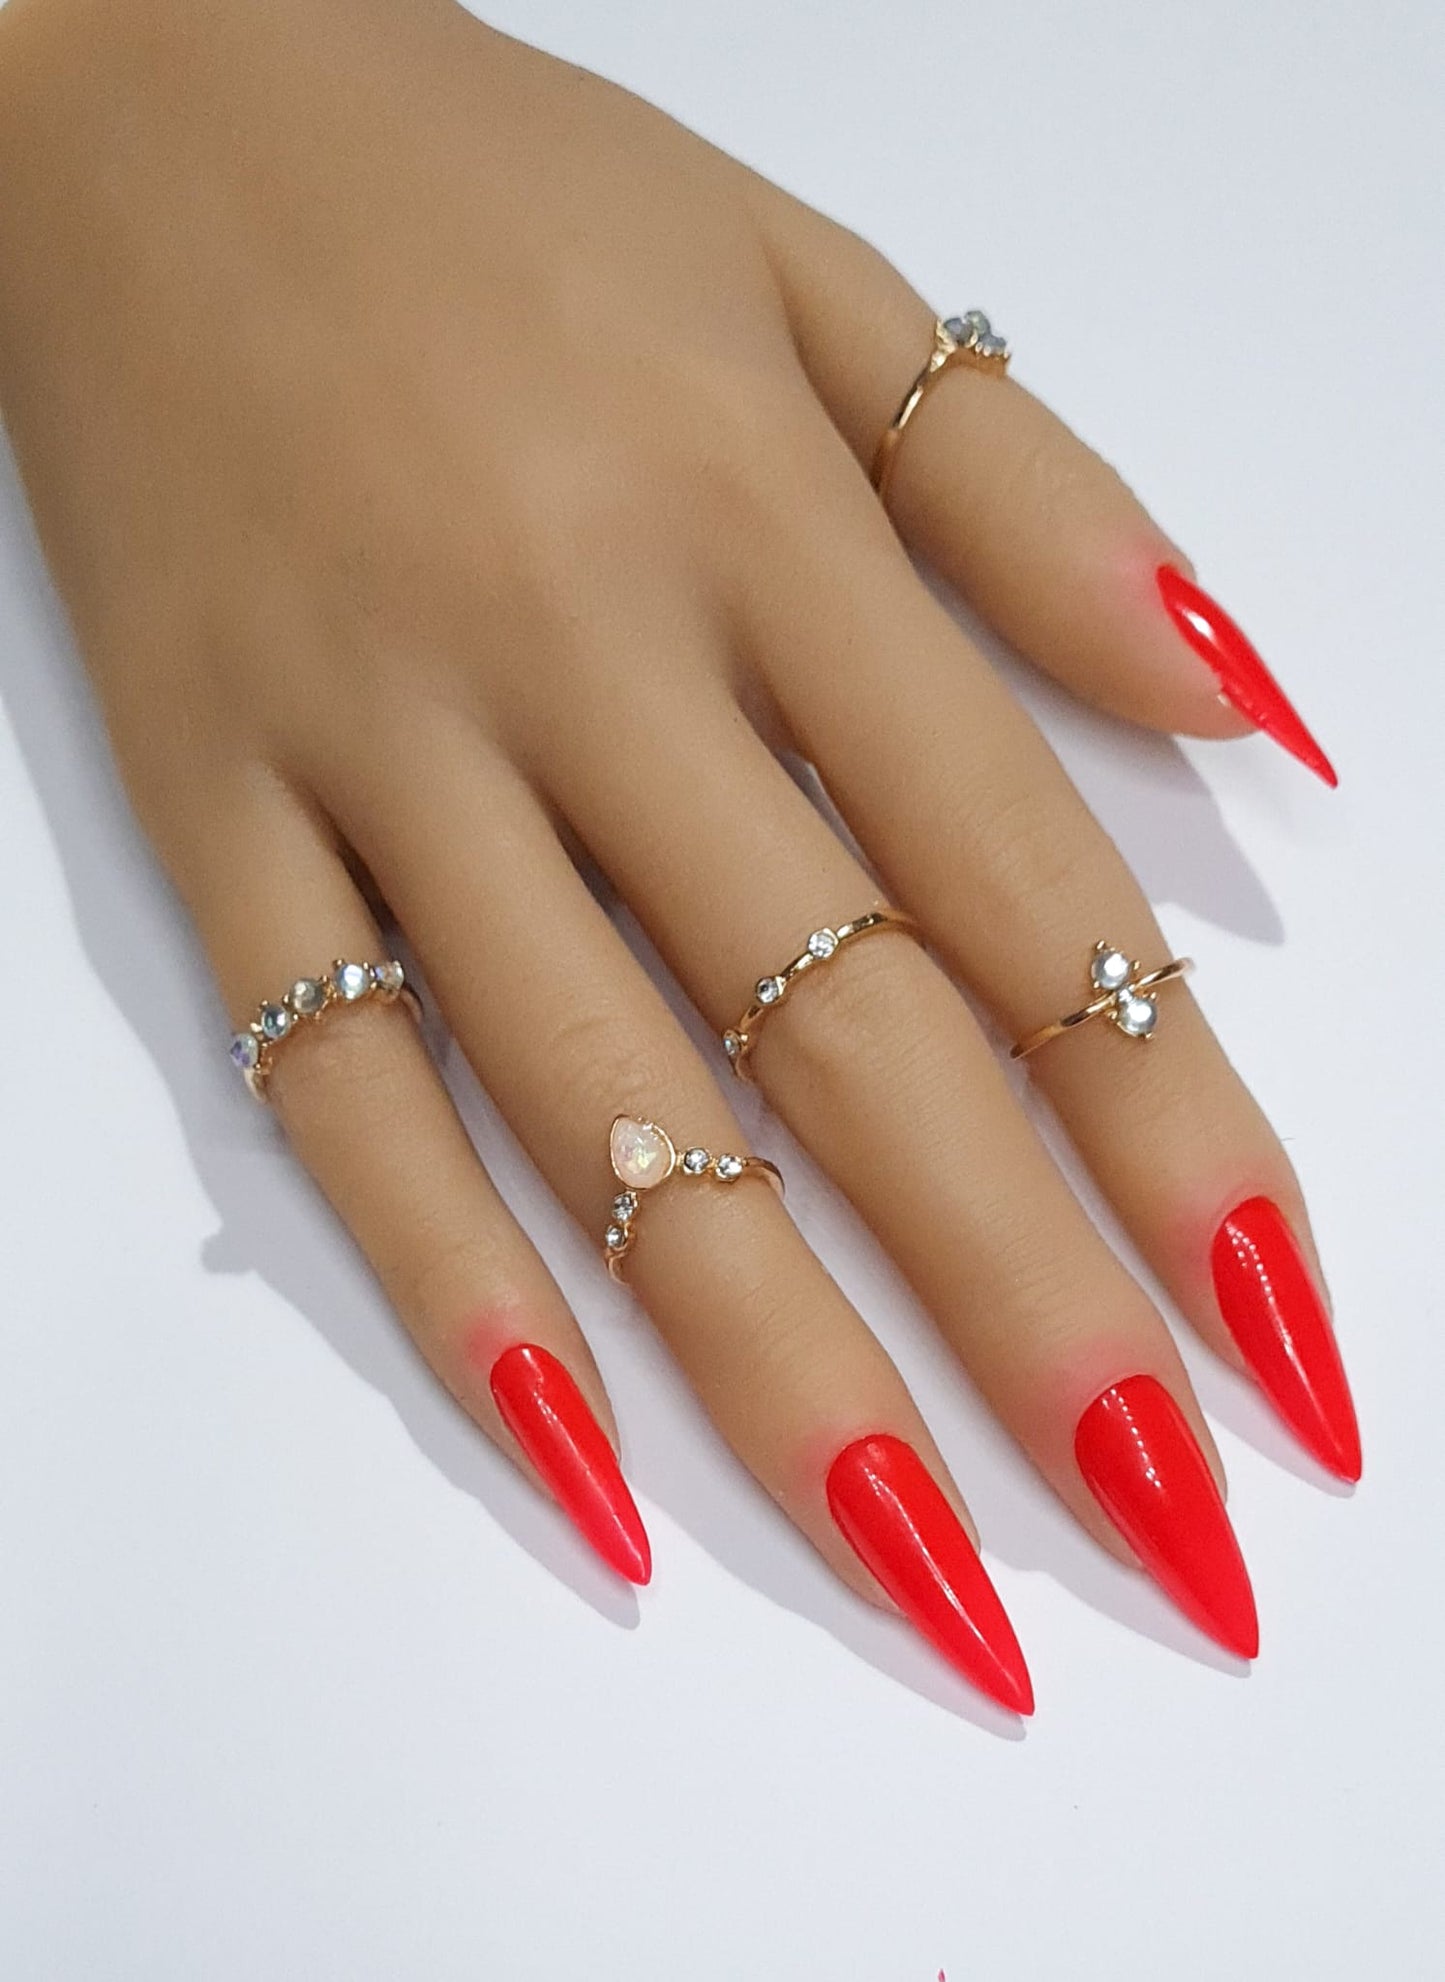 Basic fire red press on nails stiletto shaped vibrant Spring/Summer2023 collection full cover gel tip luxury false nails salon quality hand painted custom made uk